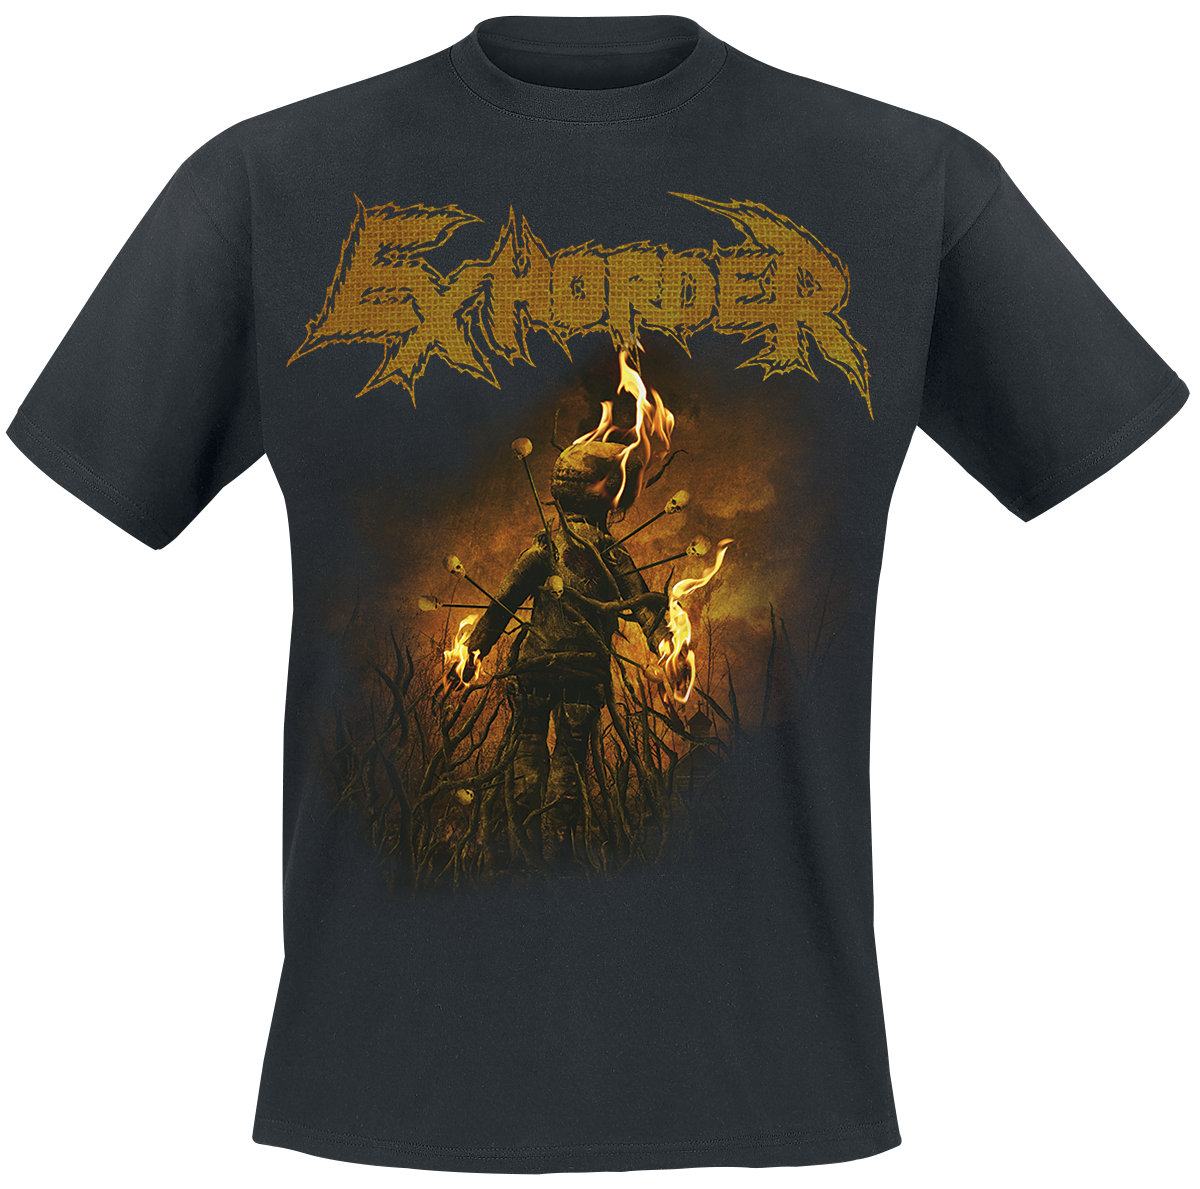 Exhorder - Mourn The Southern Skies - T-Shirt - black image